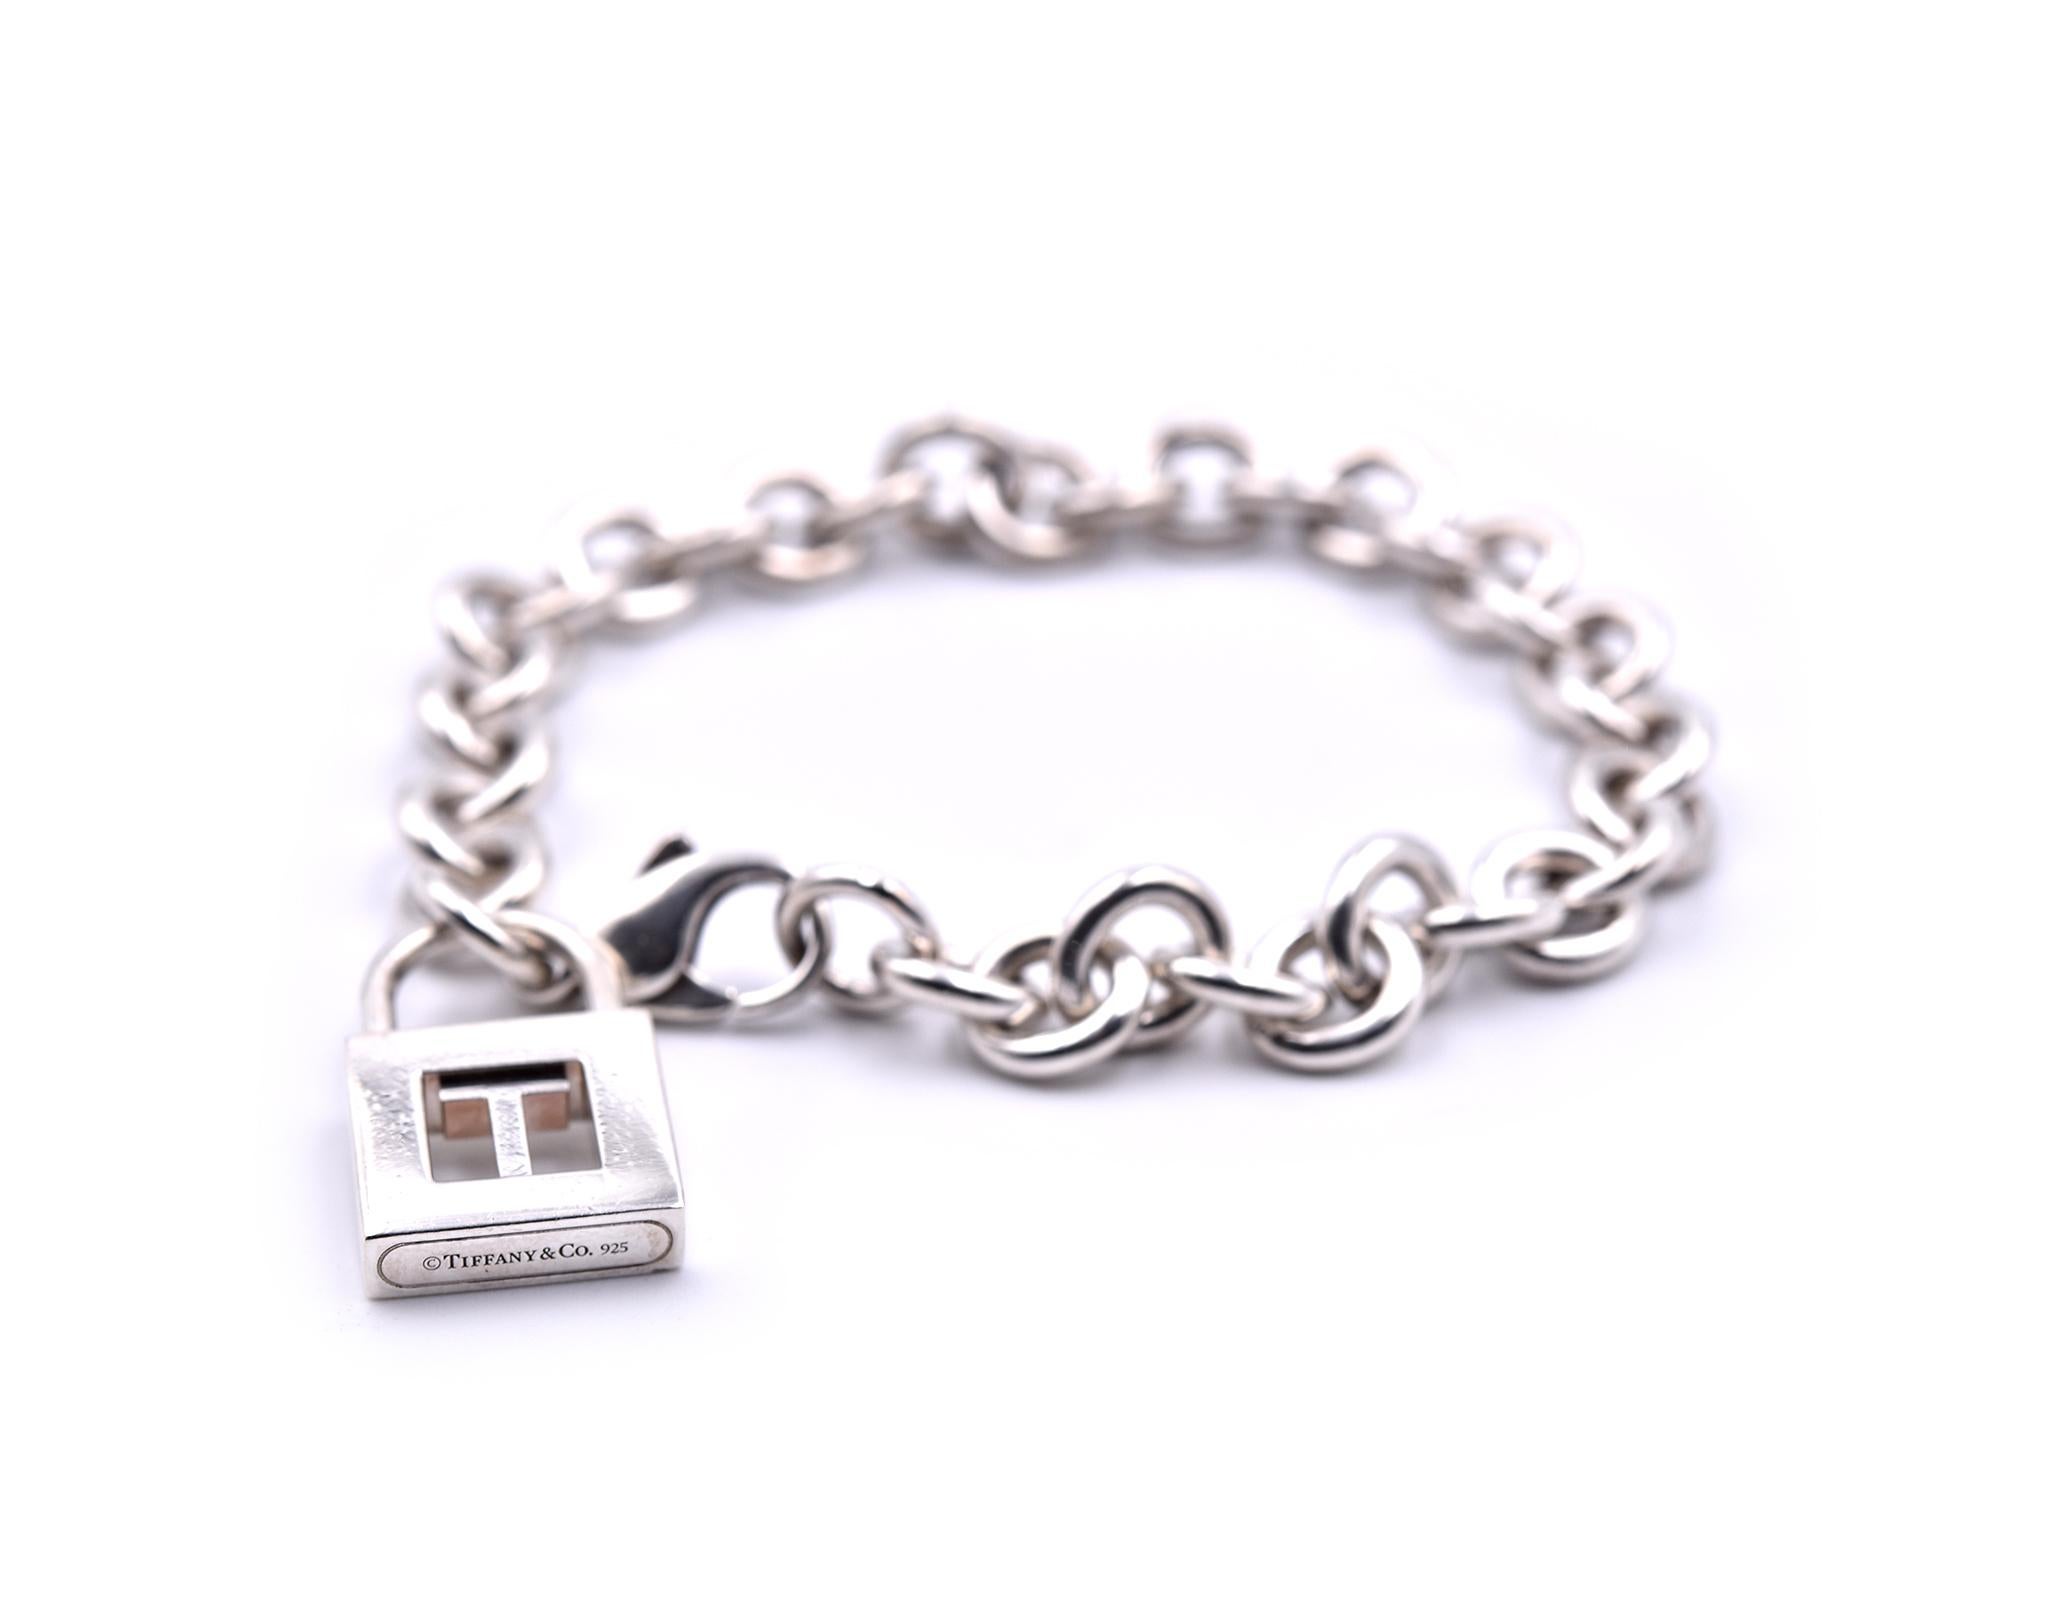 Designer: Tiffany & Co. 
Material: sterling silver
Dimensions: bracelet will fit a 7-inch wrist and approximately 8.24mm wide
Weight:  29.75 grams
